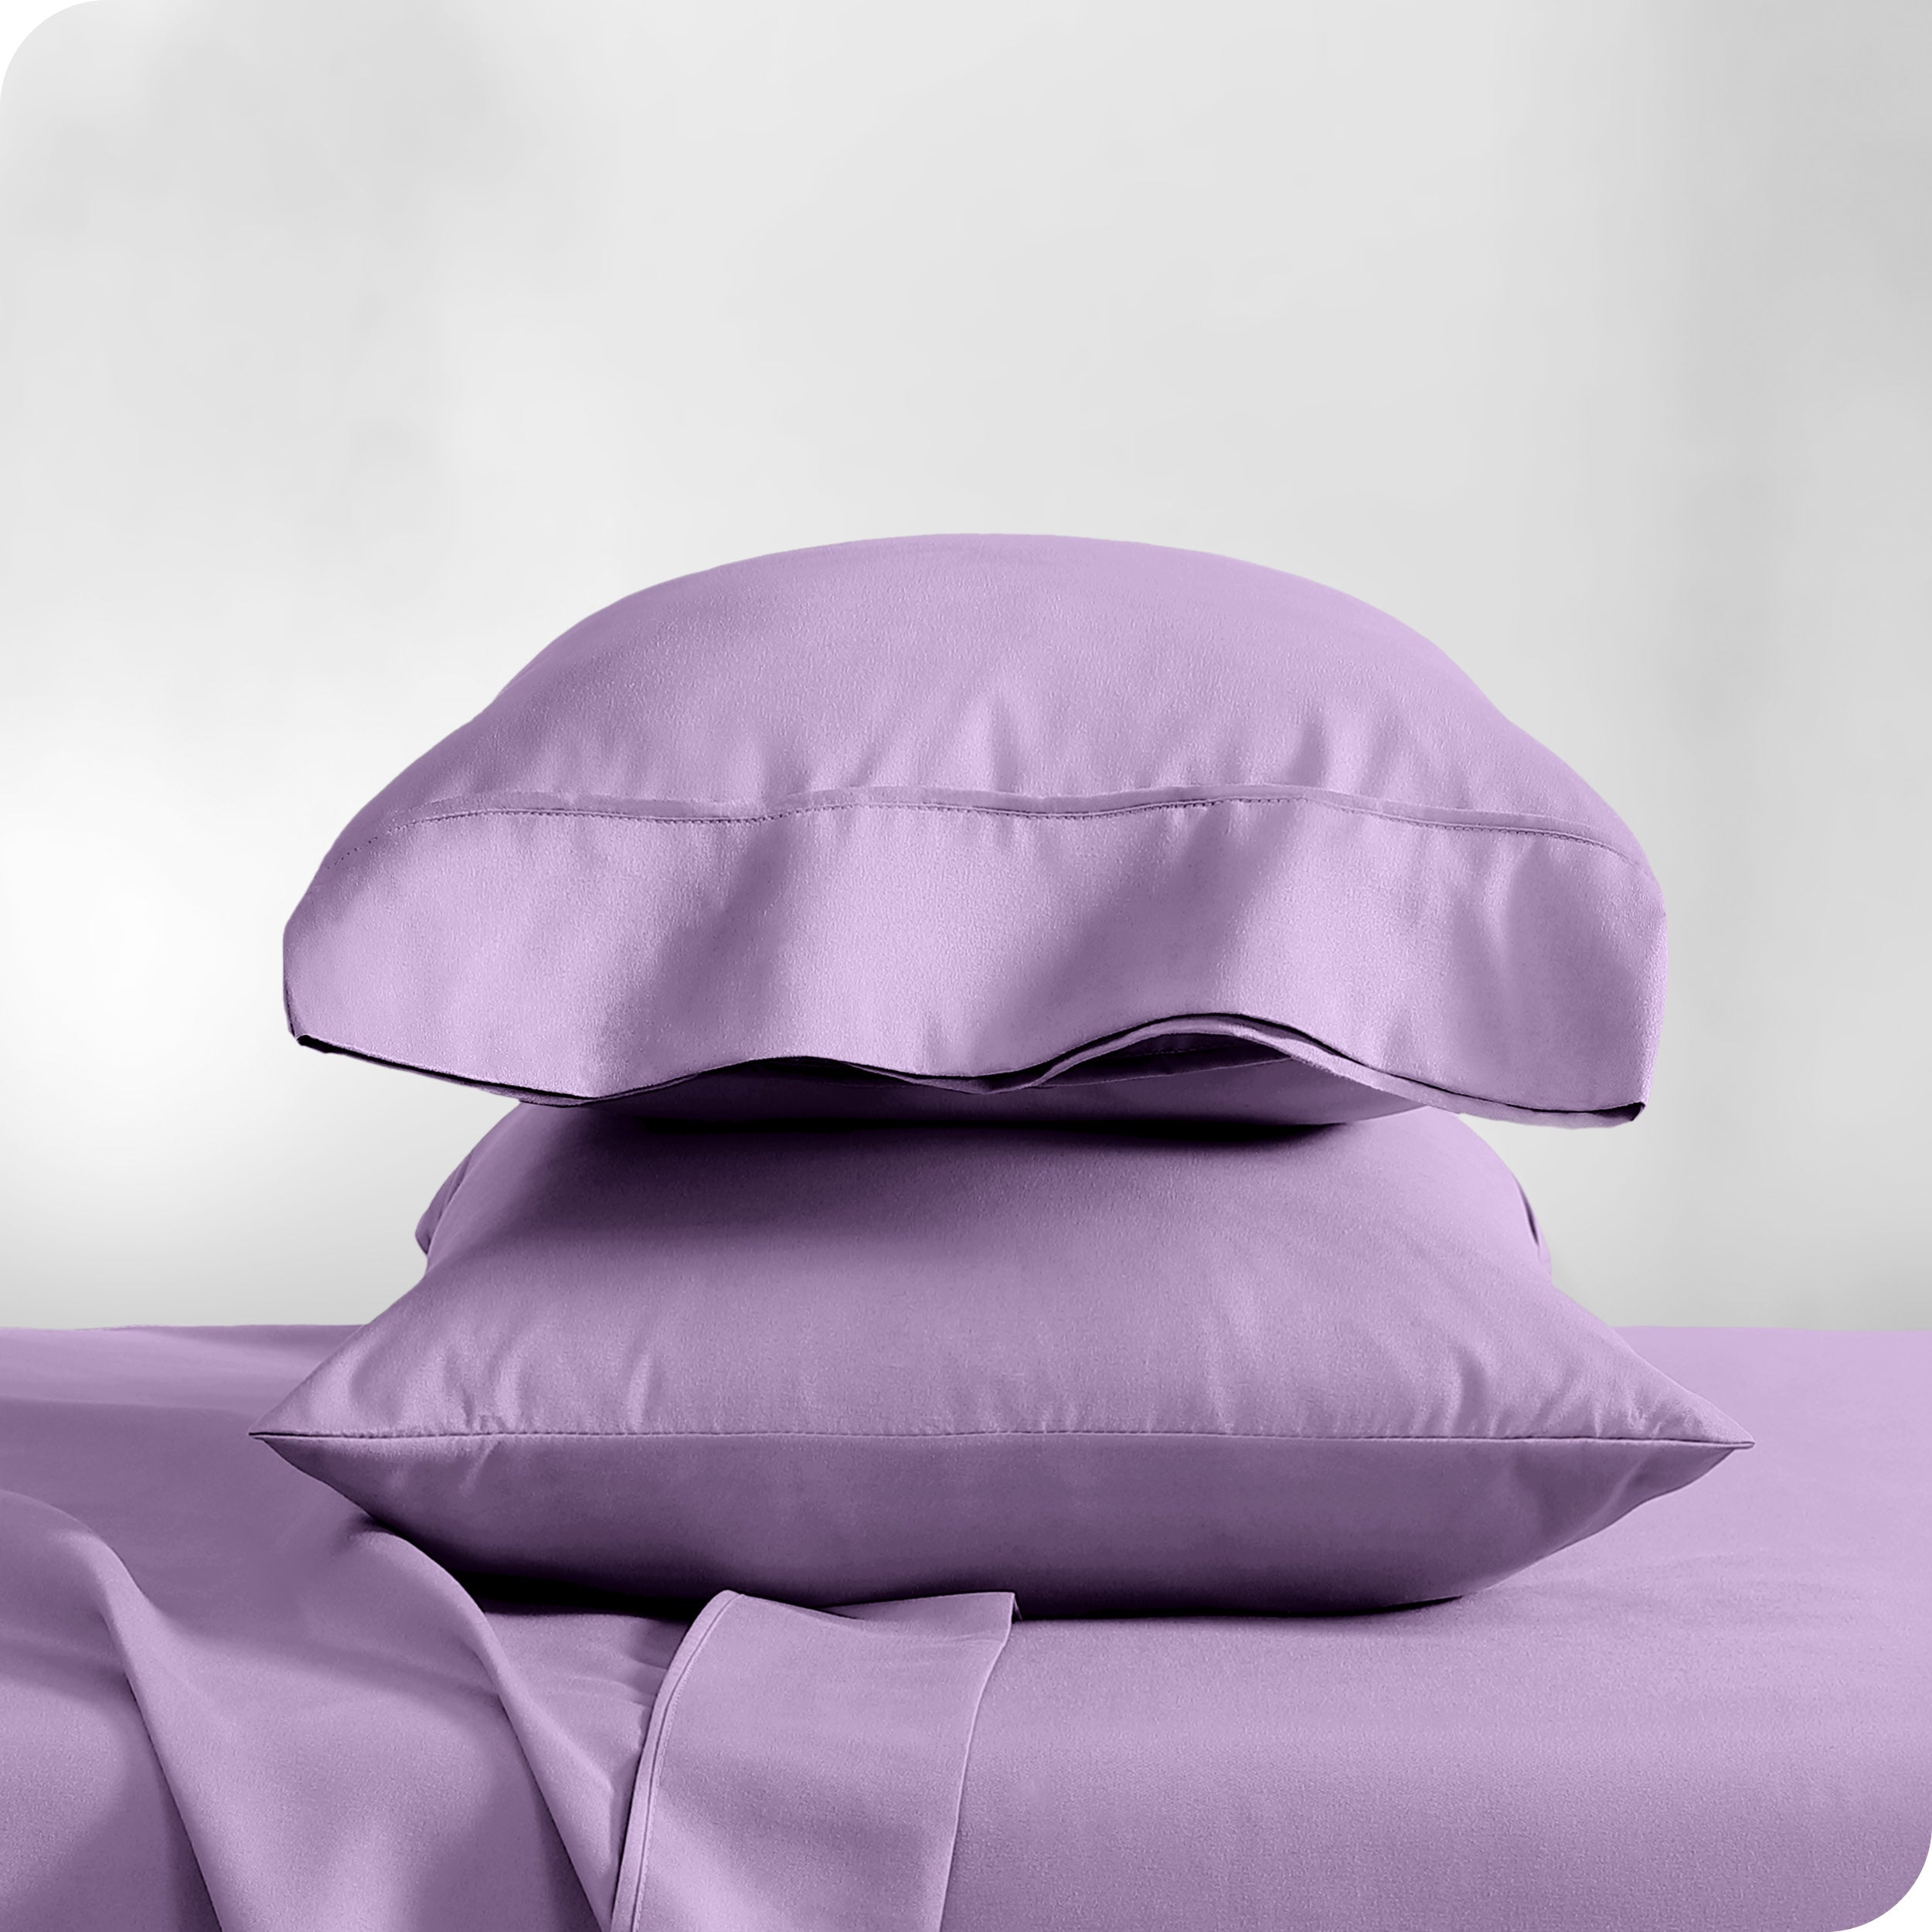 Two pillowcases on pillows stacked on a bed with matching sheets